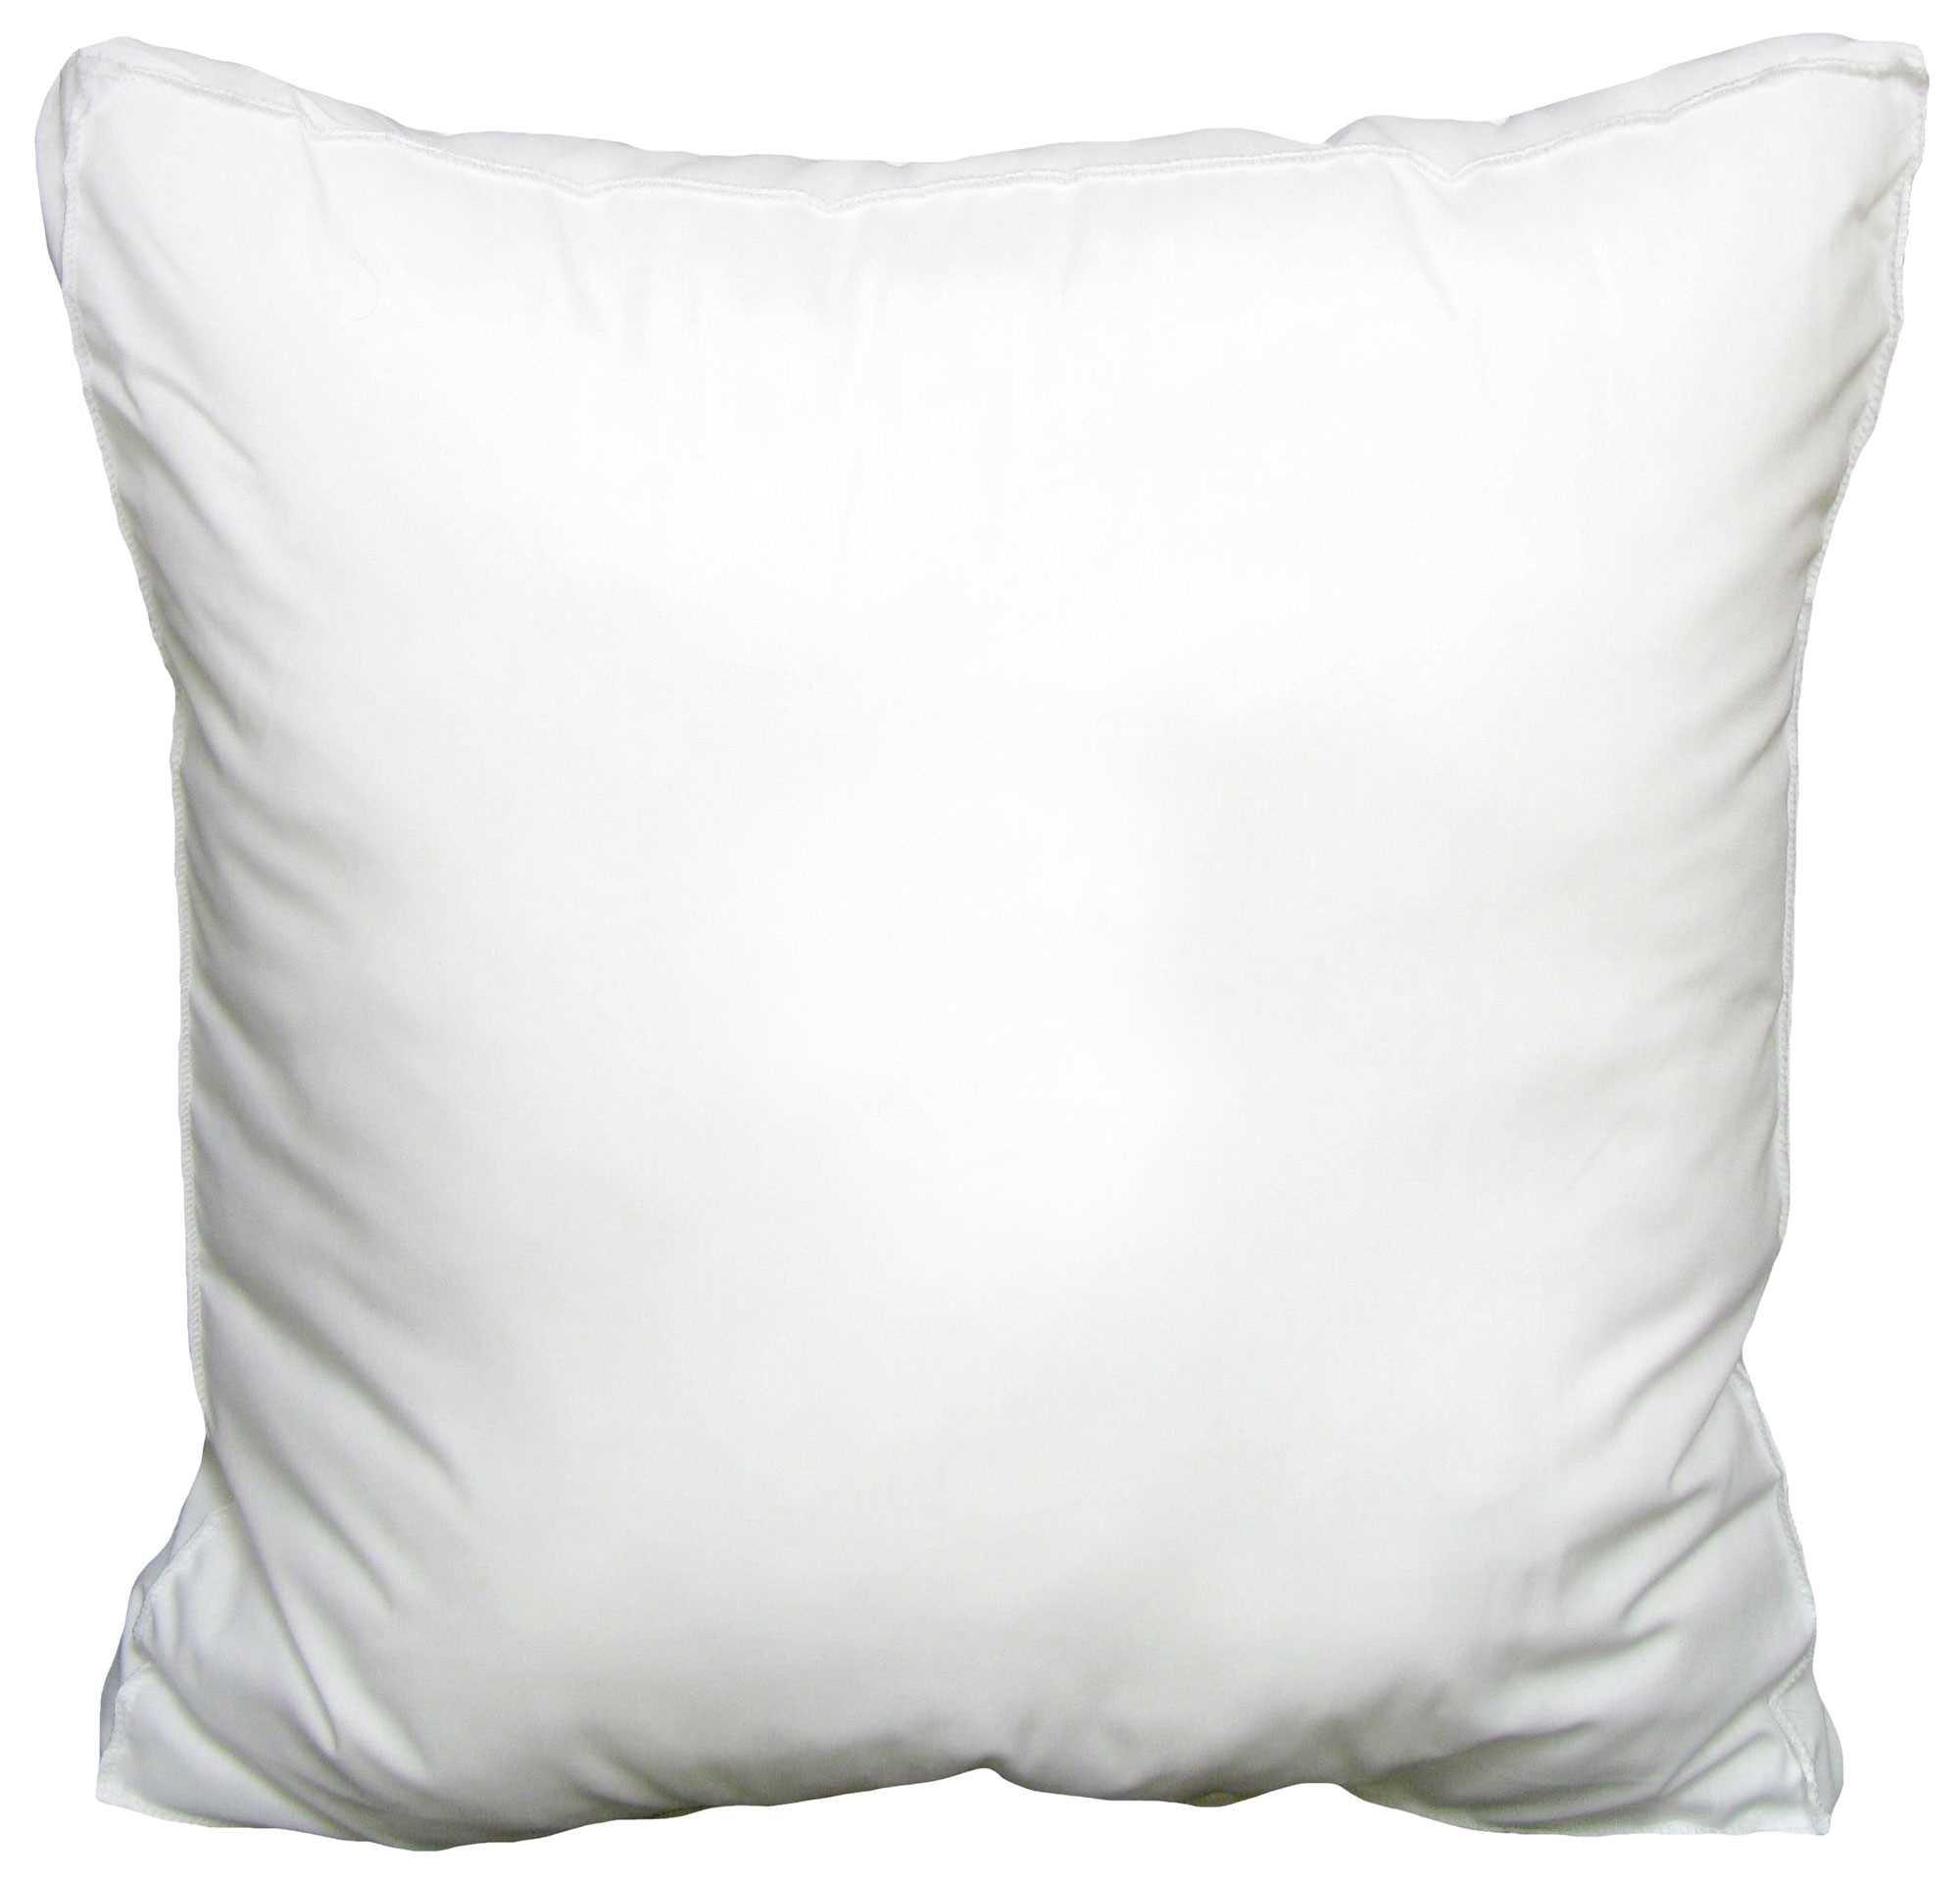 Pillow Inserts 18 X 18 Inch, Decoration Pillow, Pillow Insert Form Cushion,  Set of 2 